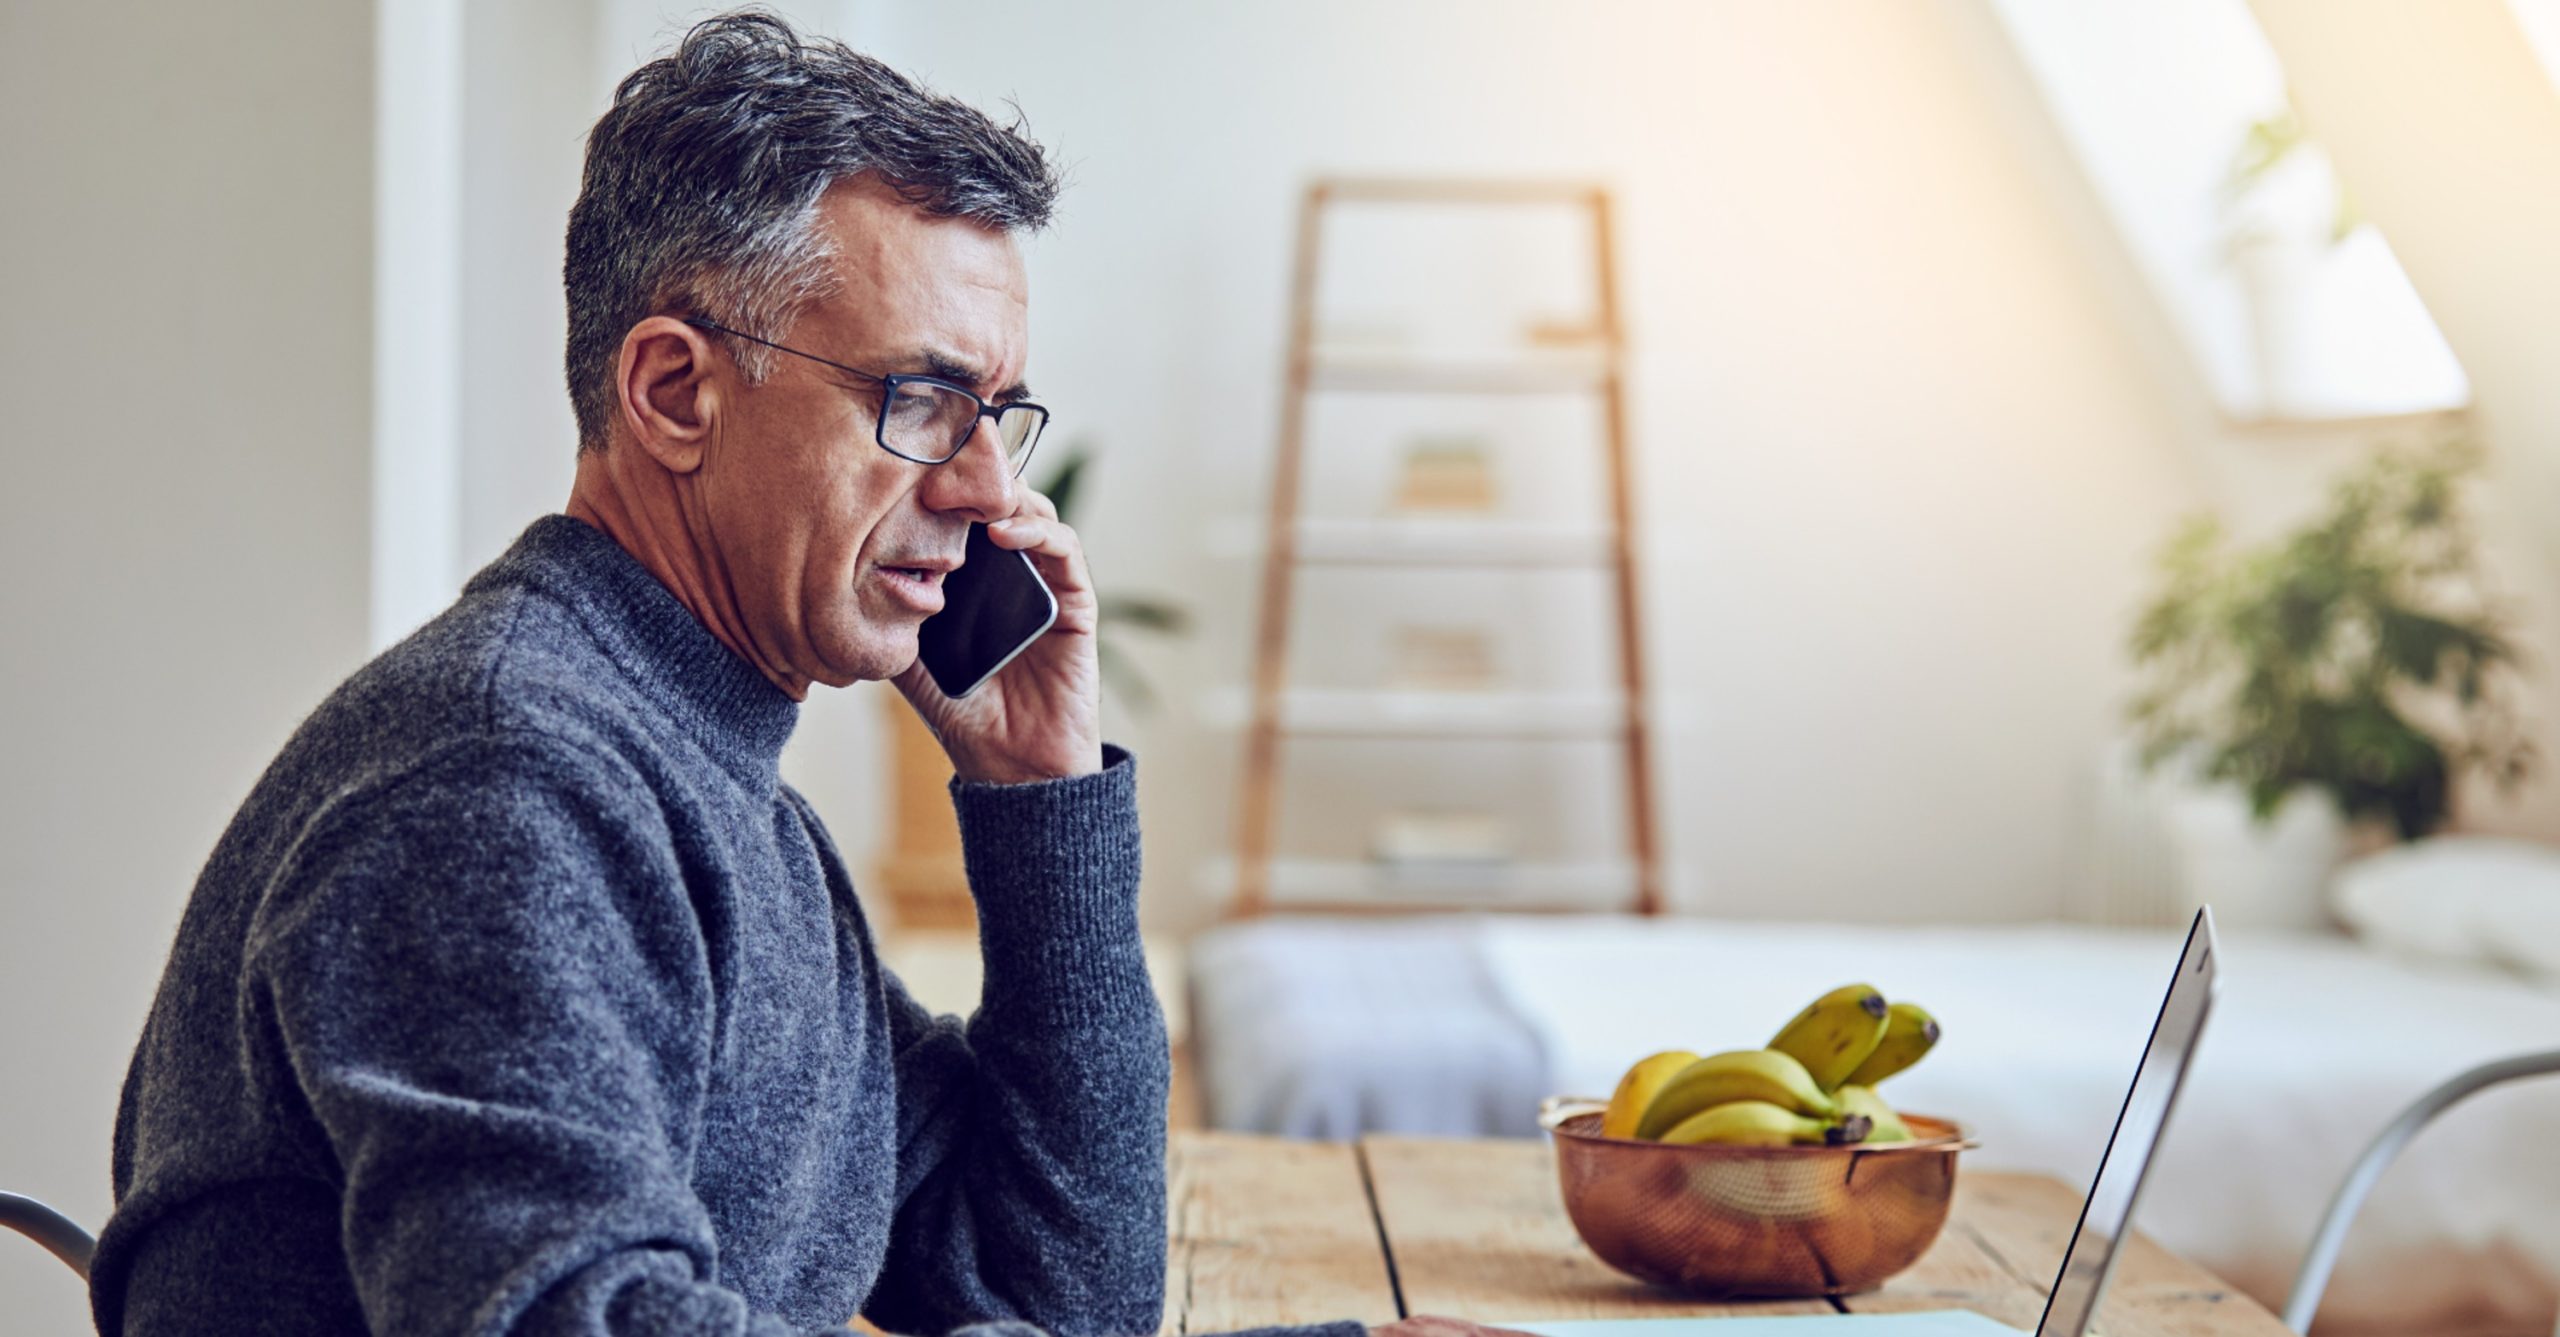 Running your business from home? Here’s how to make it work | Prospa NZ